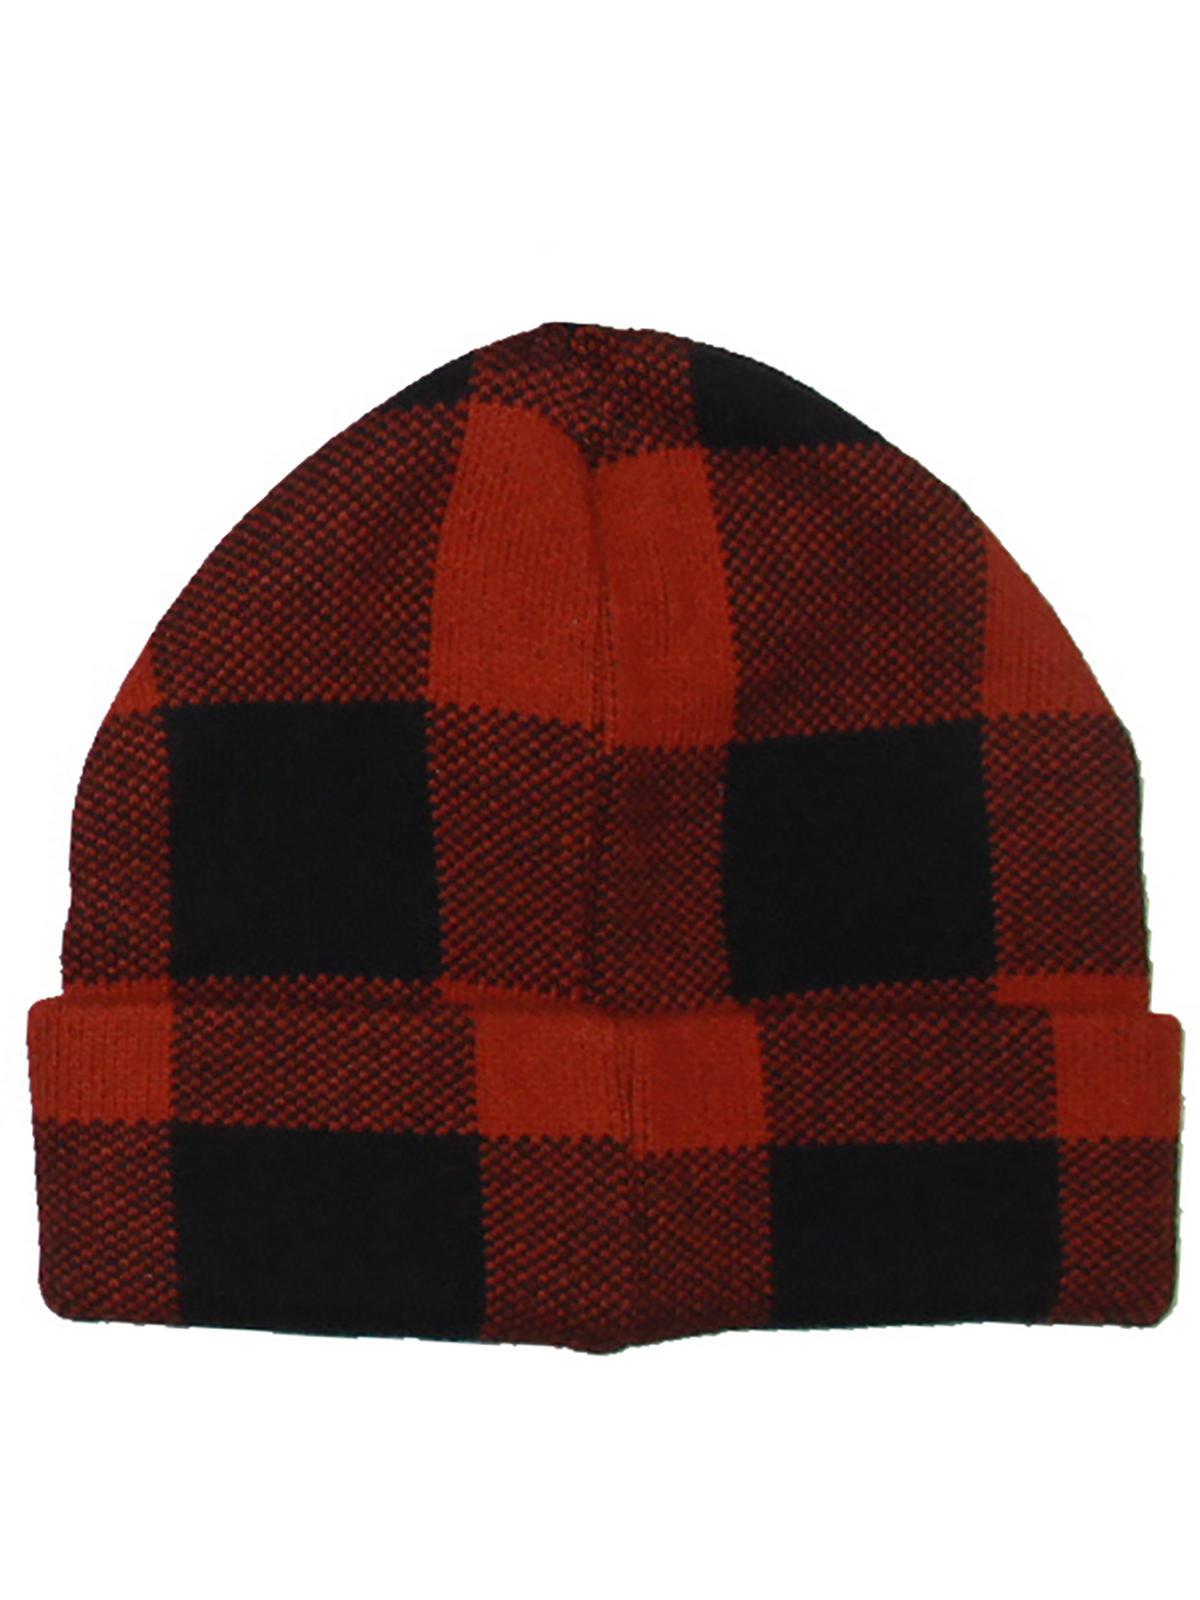 Steve Madden Check Print Fitted Beanie Hat in Red for Men